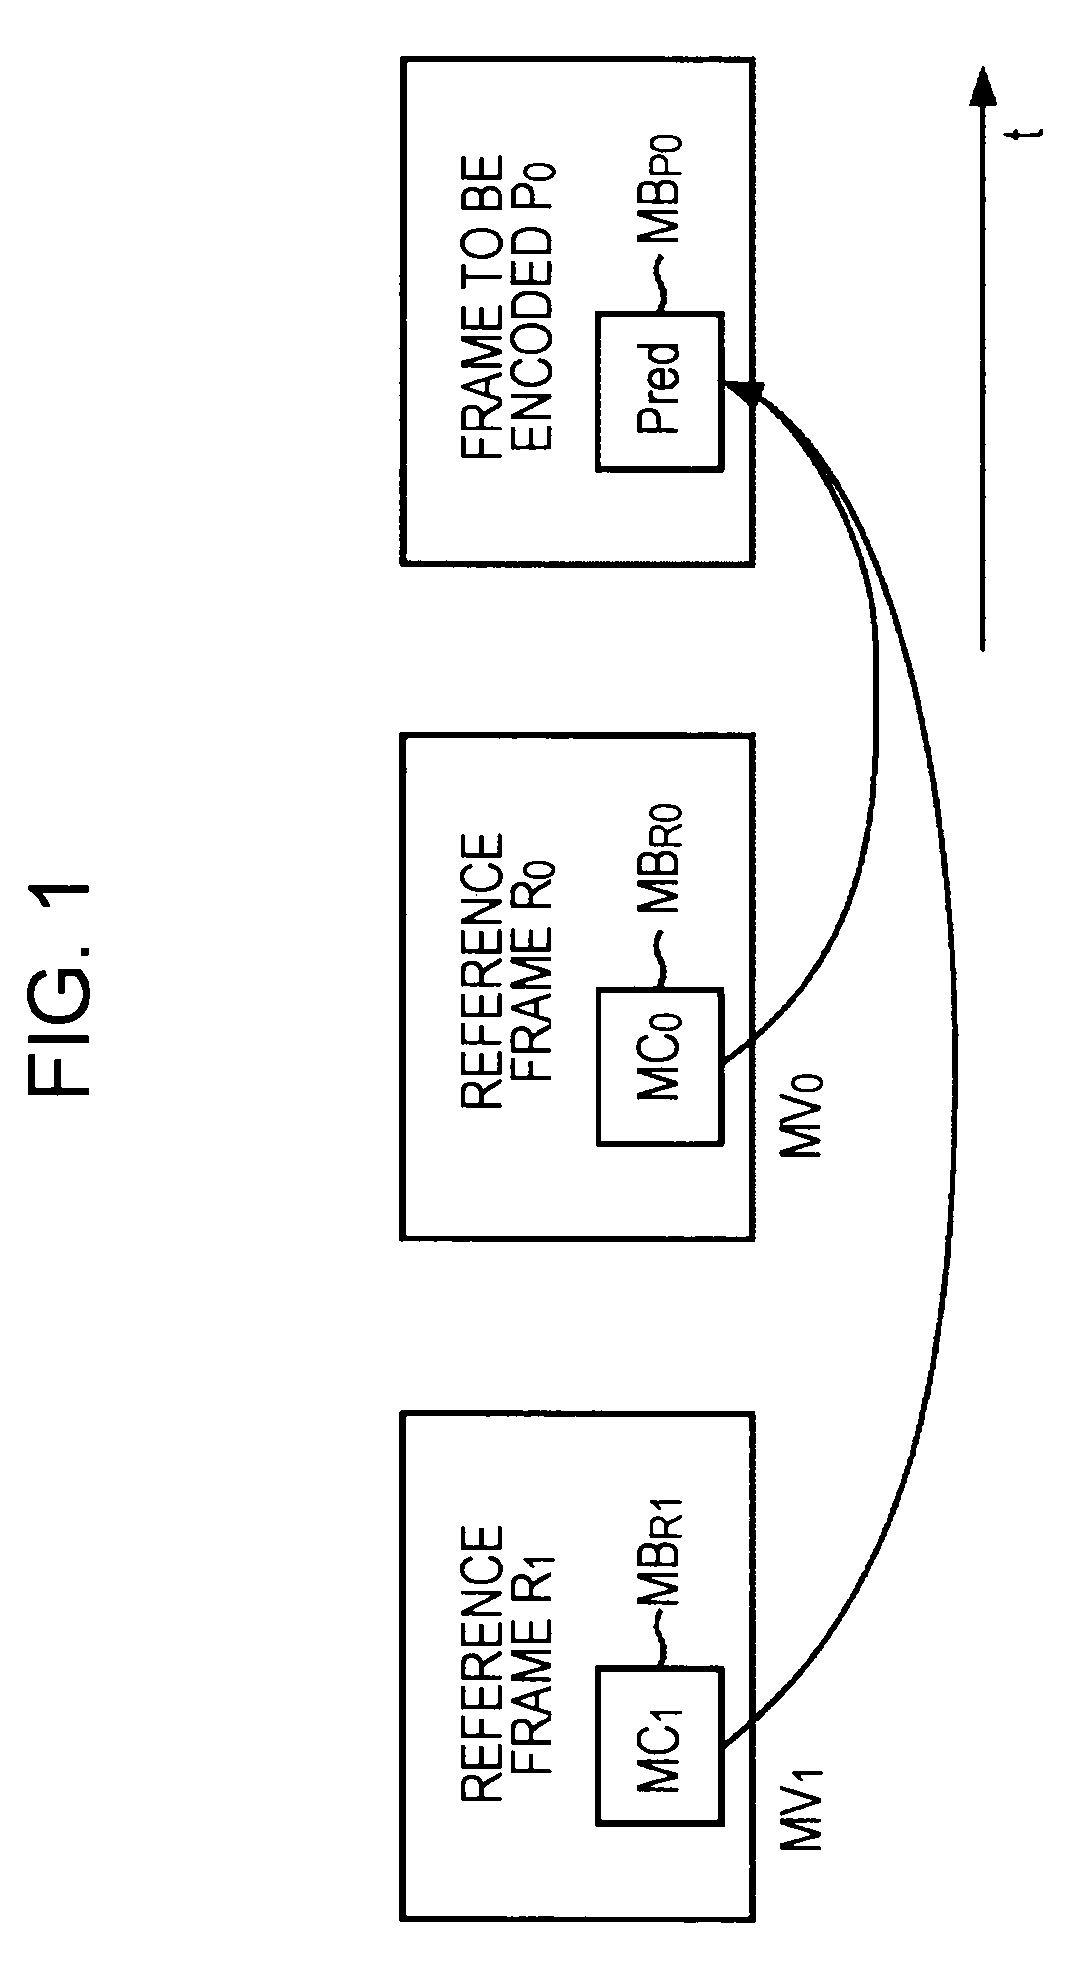 Image processing apparatus and method